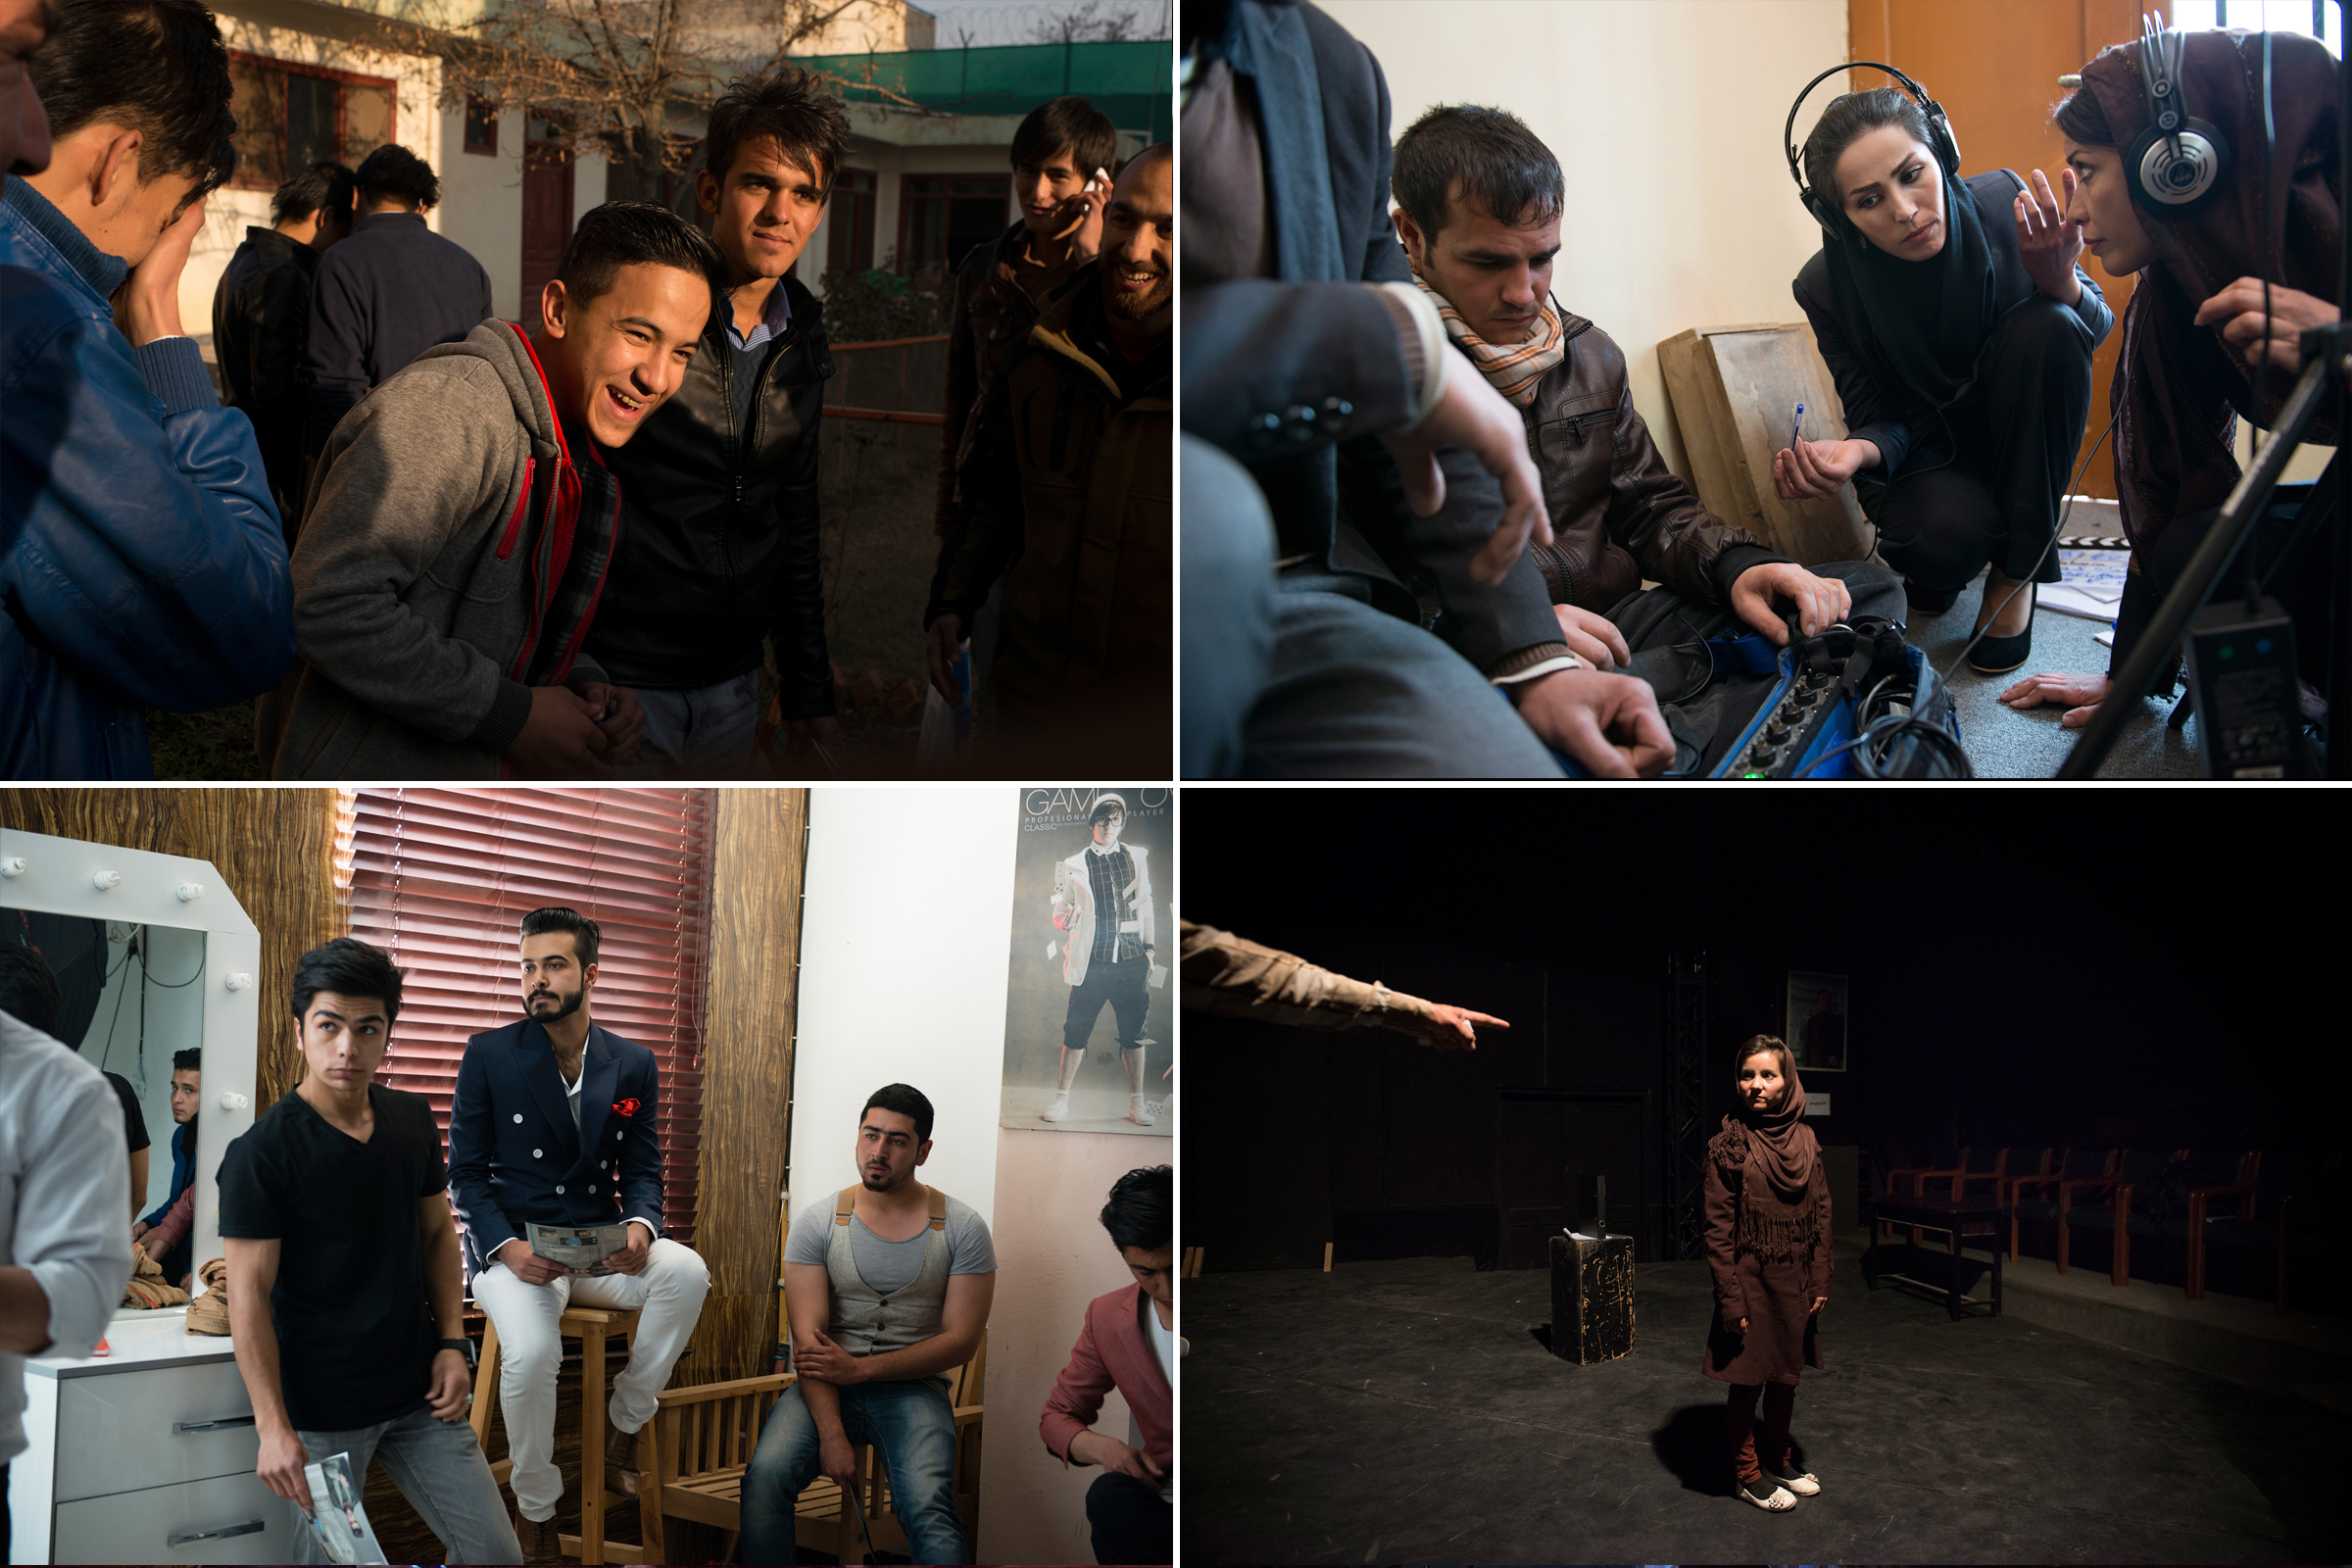    "The Millennials of Afghanistan Have Never Known a World Without War. So Why Are These Kids So Hopeful?"     Photos:   Kiana Hayeri   Text:  Sophie Brill  Role:  Final sequence, captions, research coordinator. 